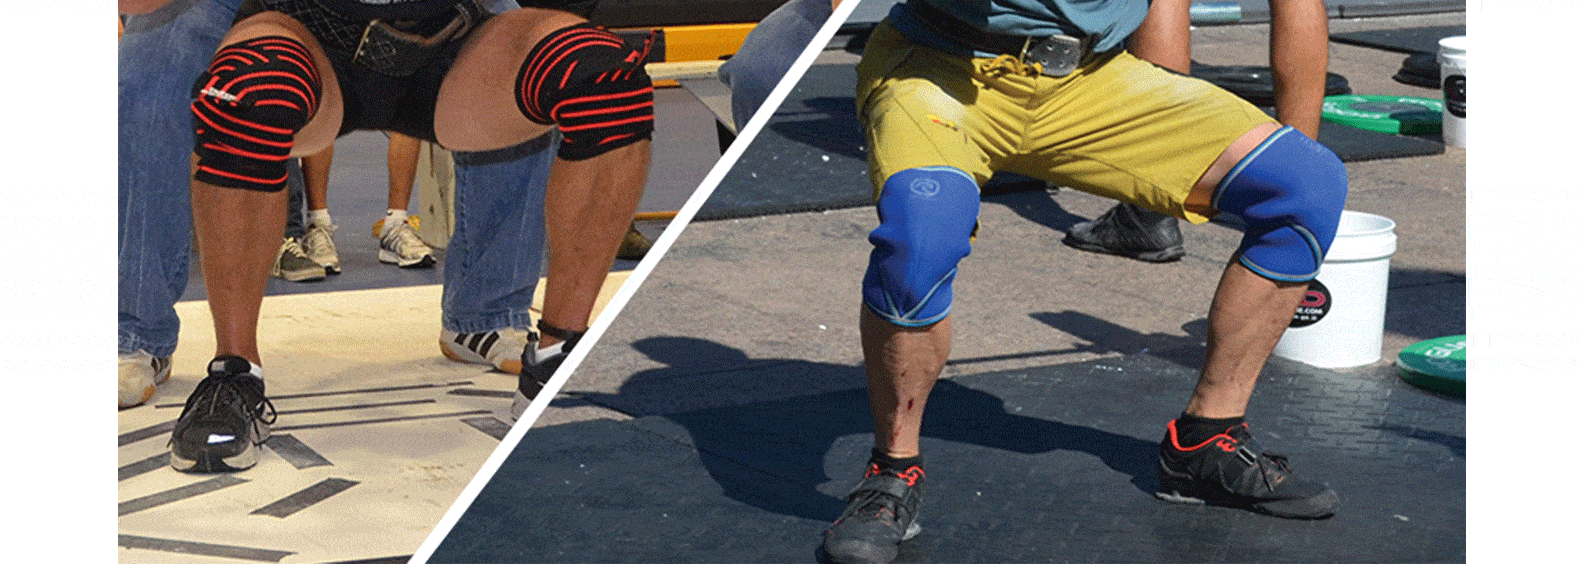 What Makes the Best Knee Pads for CrossFit and Weightlifting